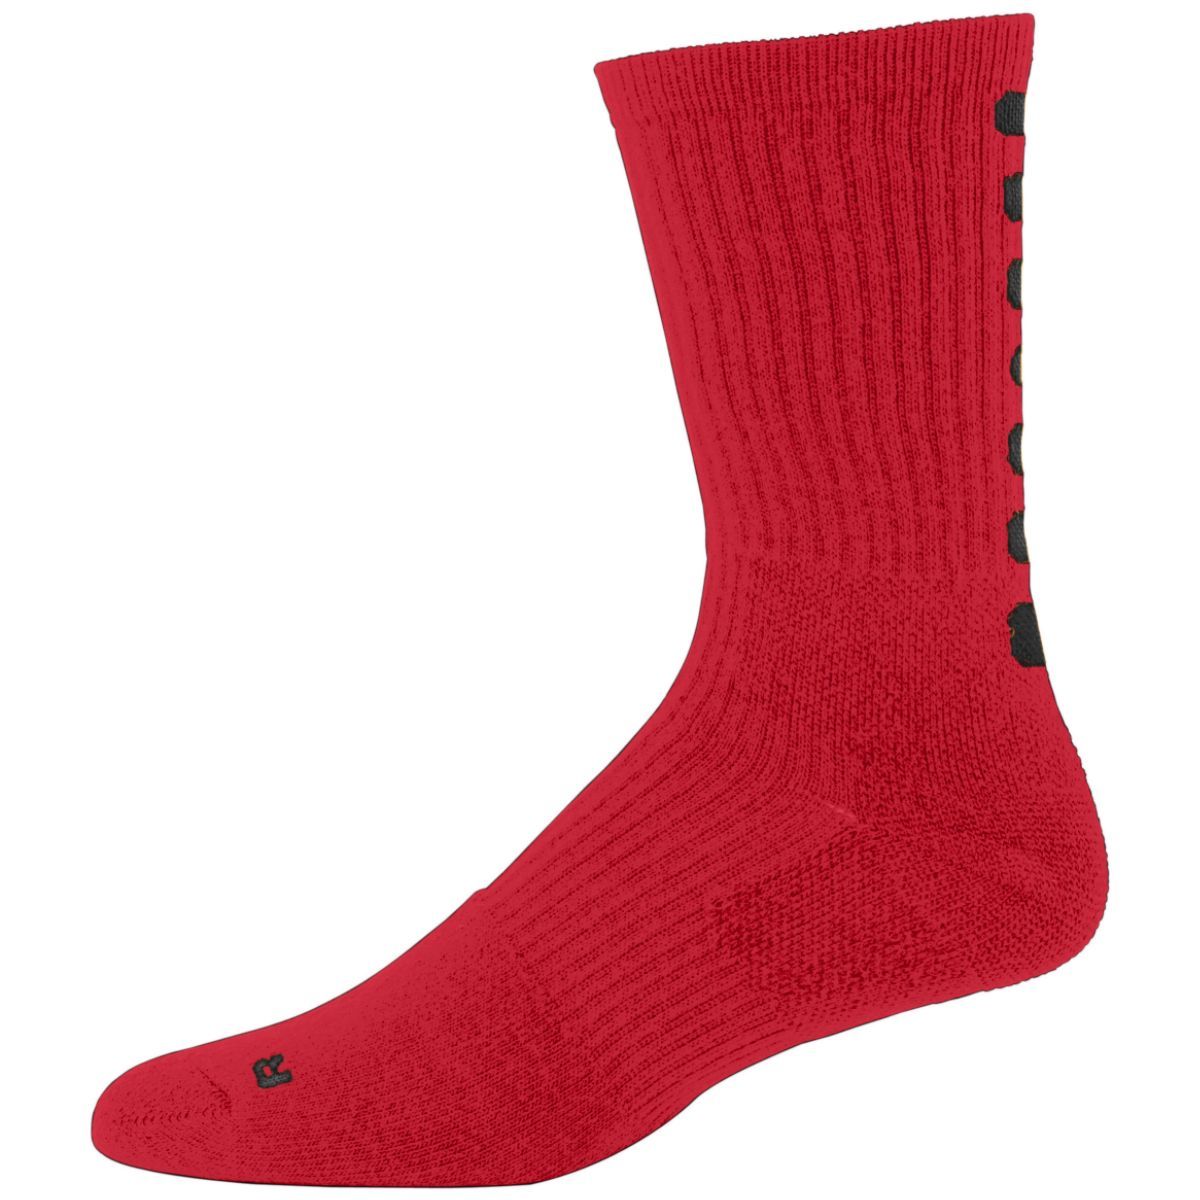 Augusta Sportswear Color Block Crew Sock in Red/Black  -Part of the Adult, Augusta-Products, Accessories-Socks product lines at KanaleyCreations.com